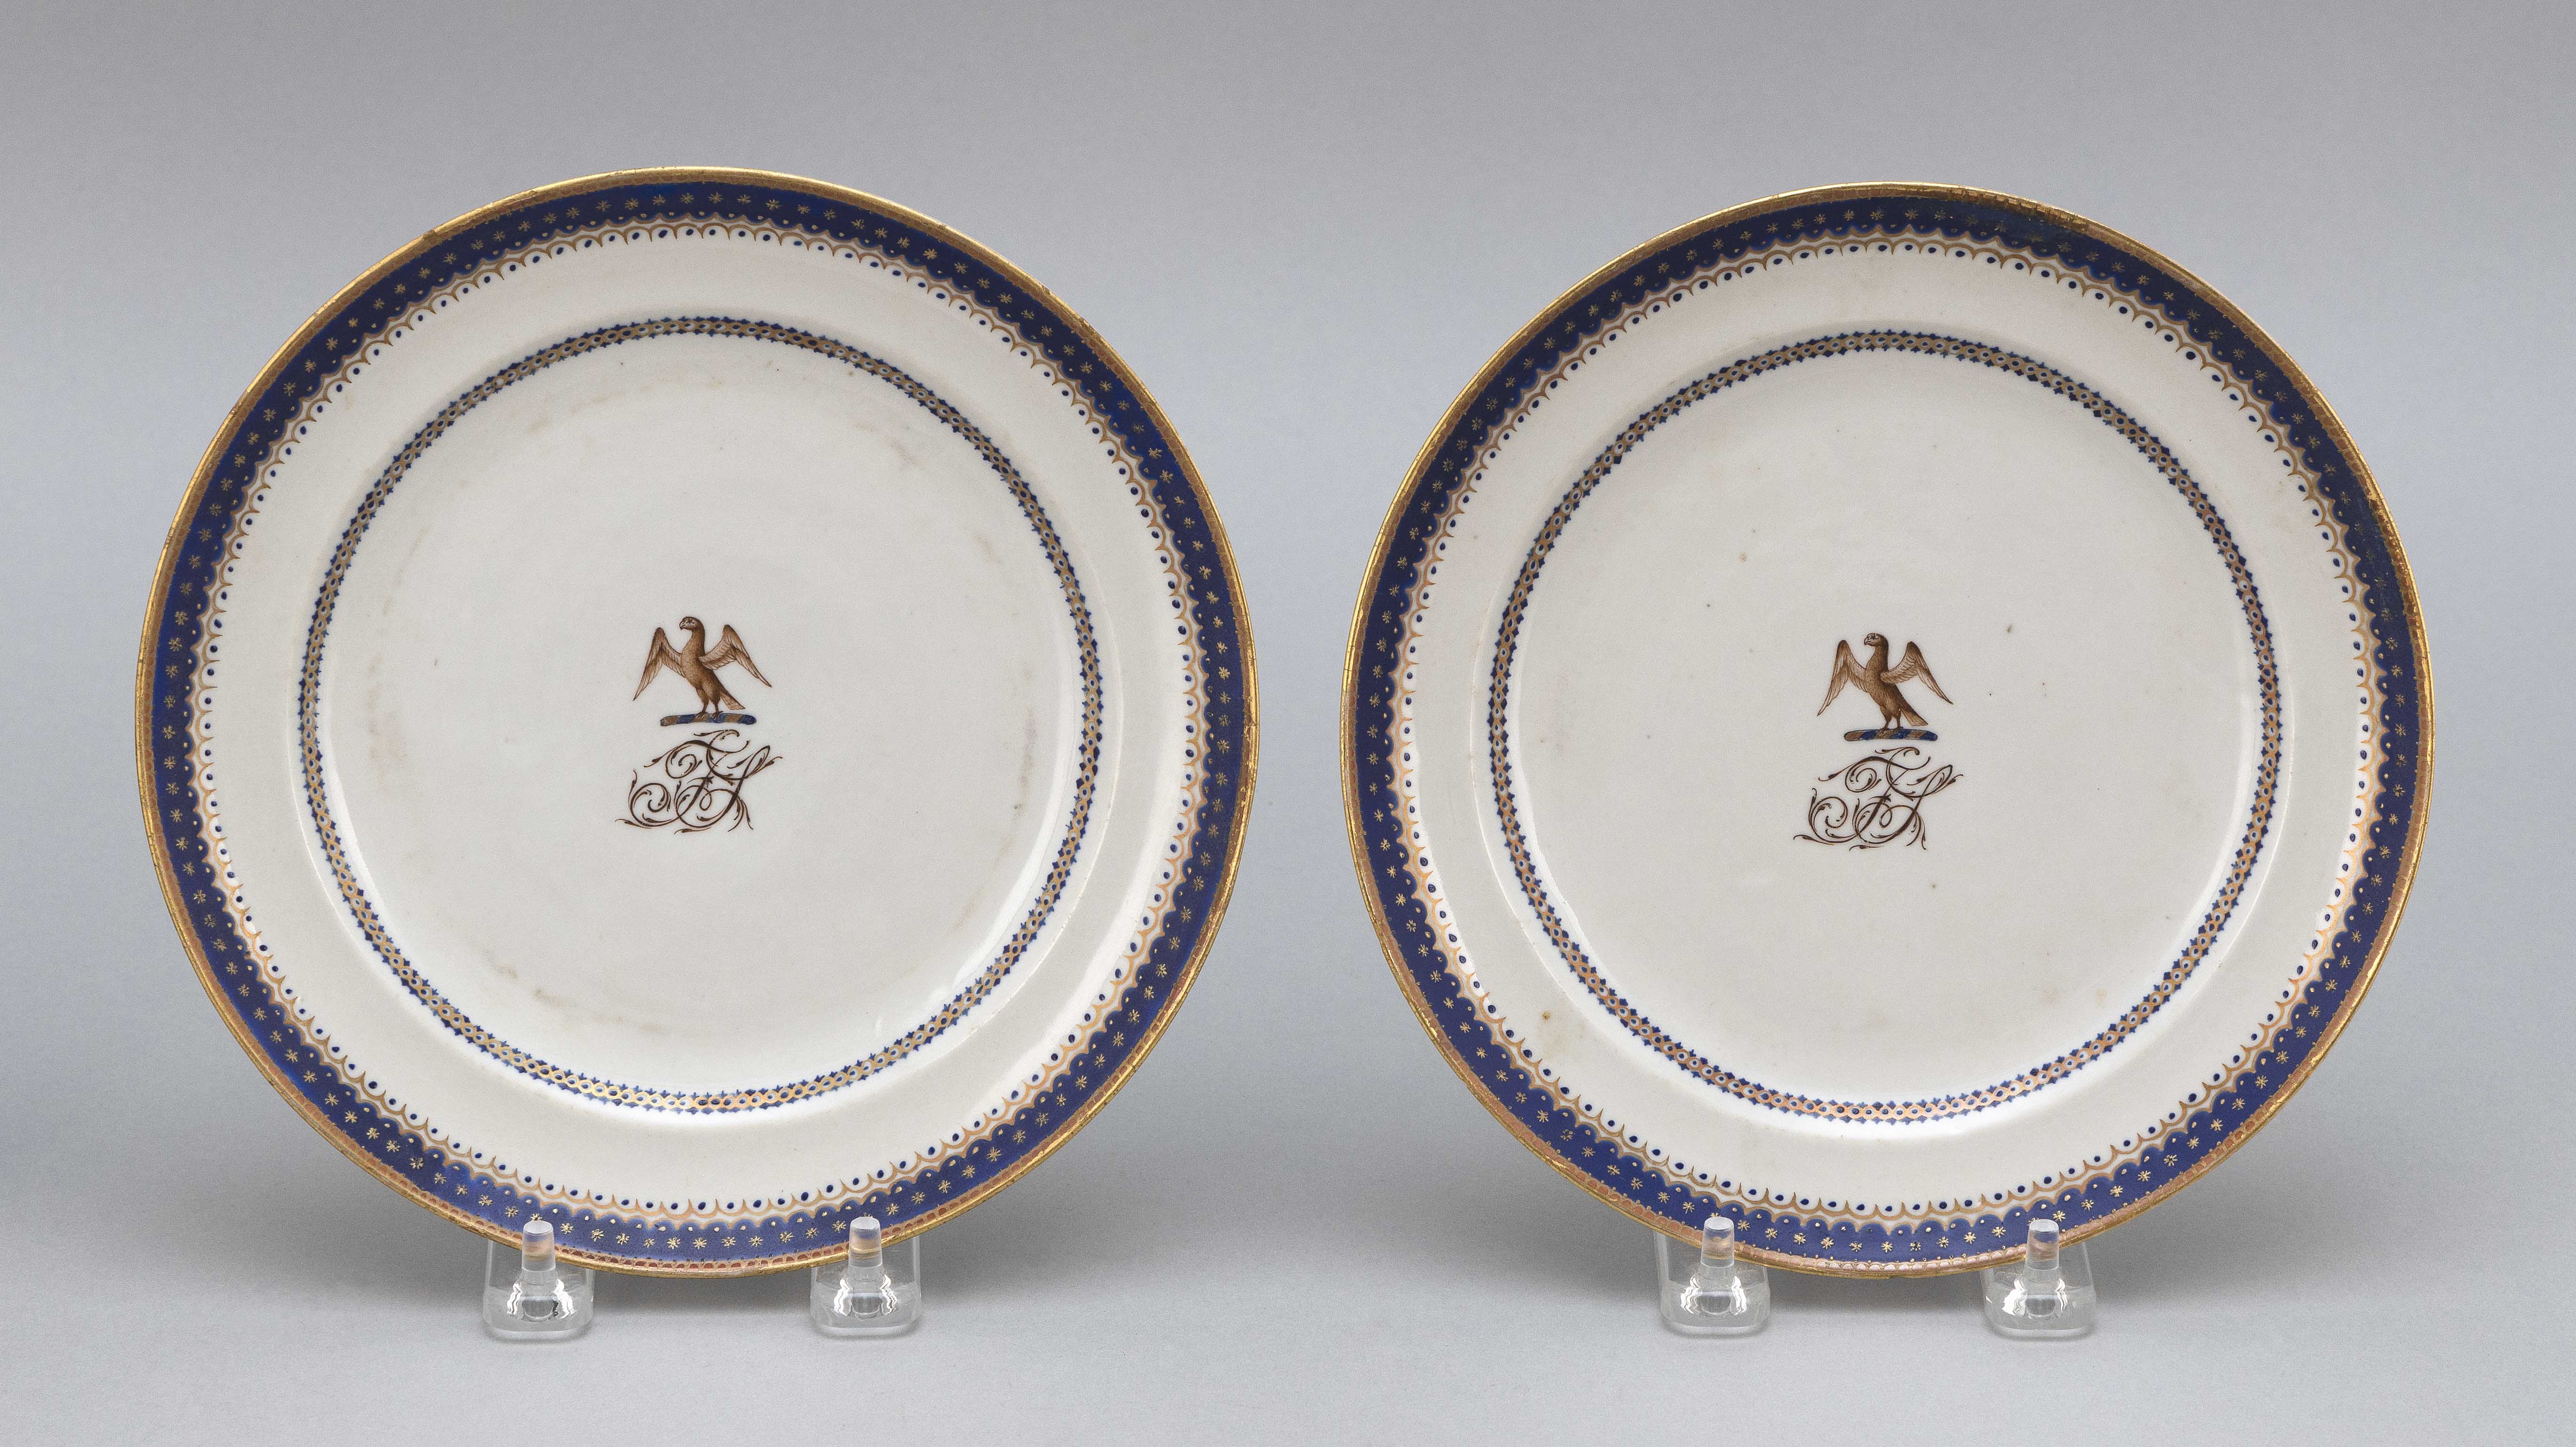 PAIR OF CHINESE EXPORT BLUE AND WHITE ARMORIAL PORCELAIN PLATES Early ...
